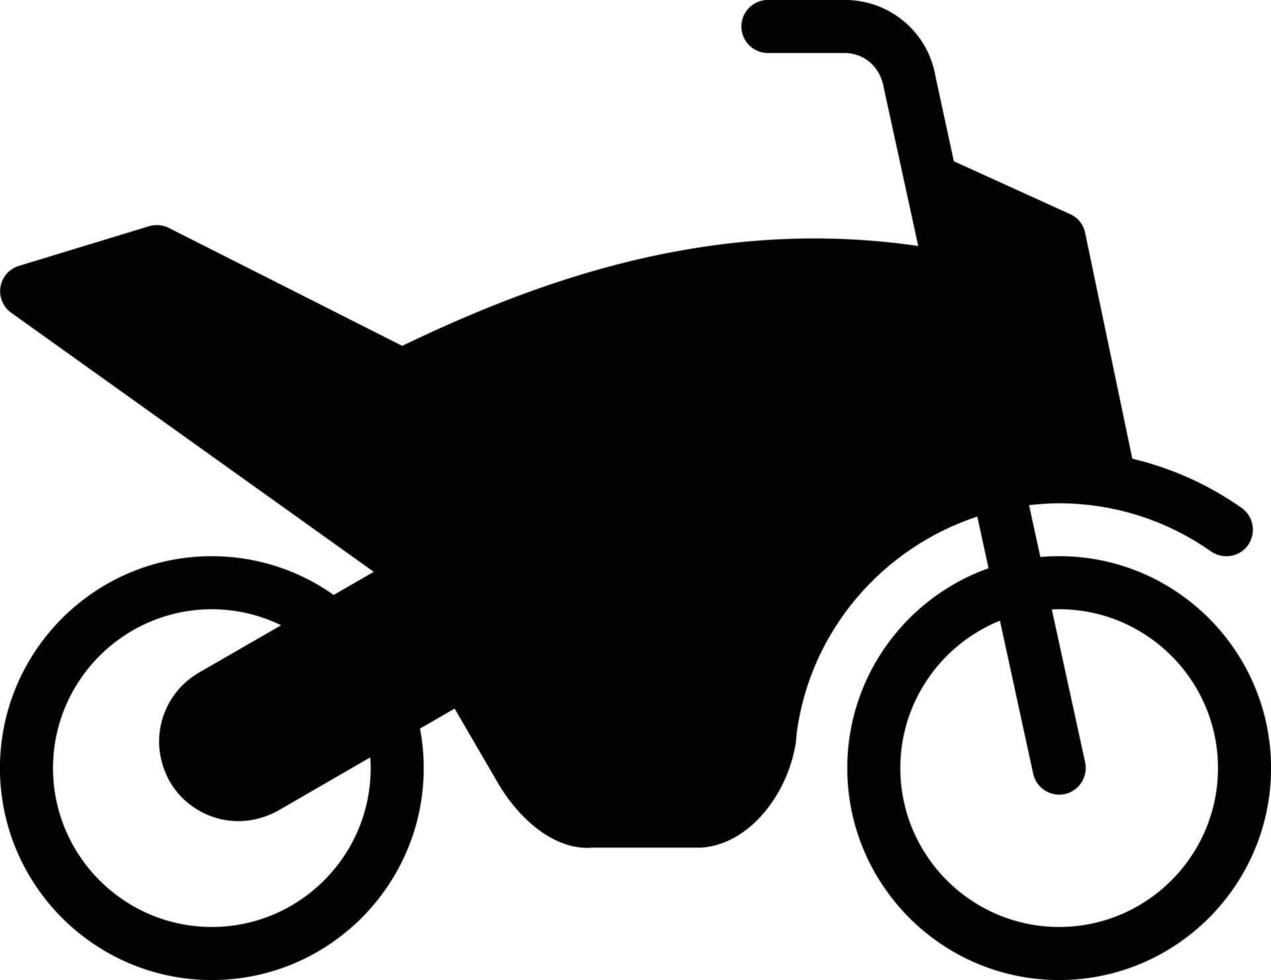 bike vector illustration on a background.Premium quality symbols.vector icons for concept and graphic design.